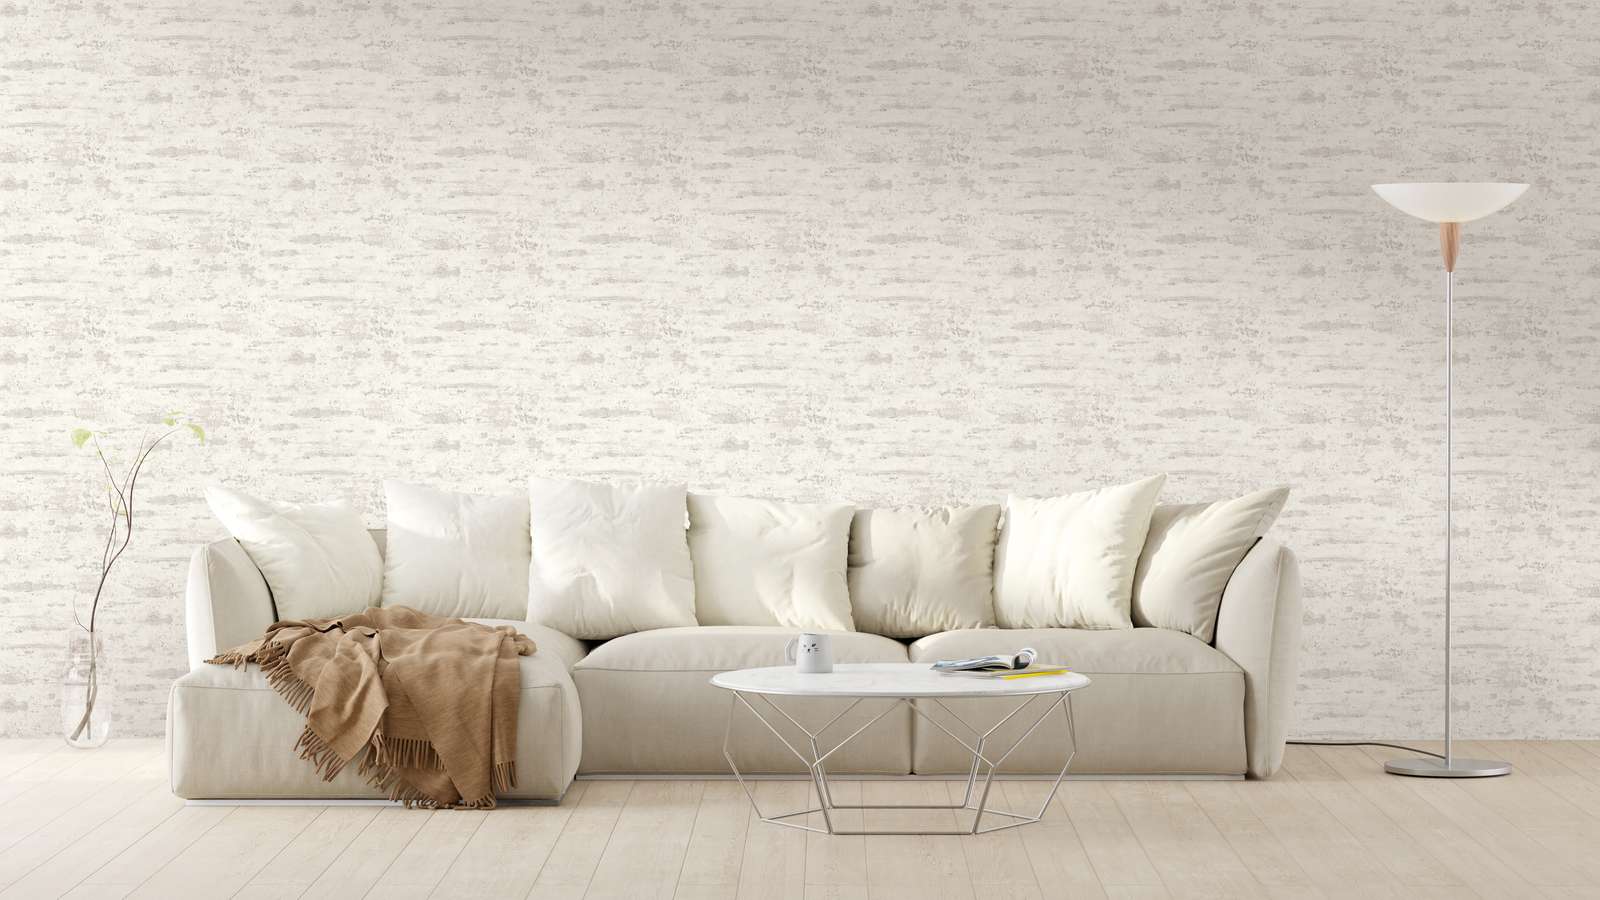             Non-woven wallpaper rust look & used look - white
        